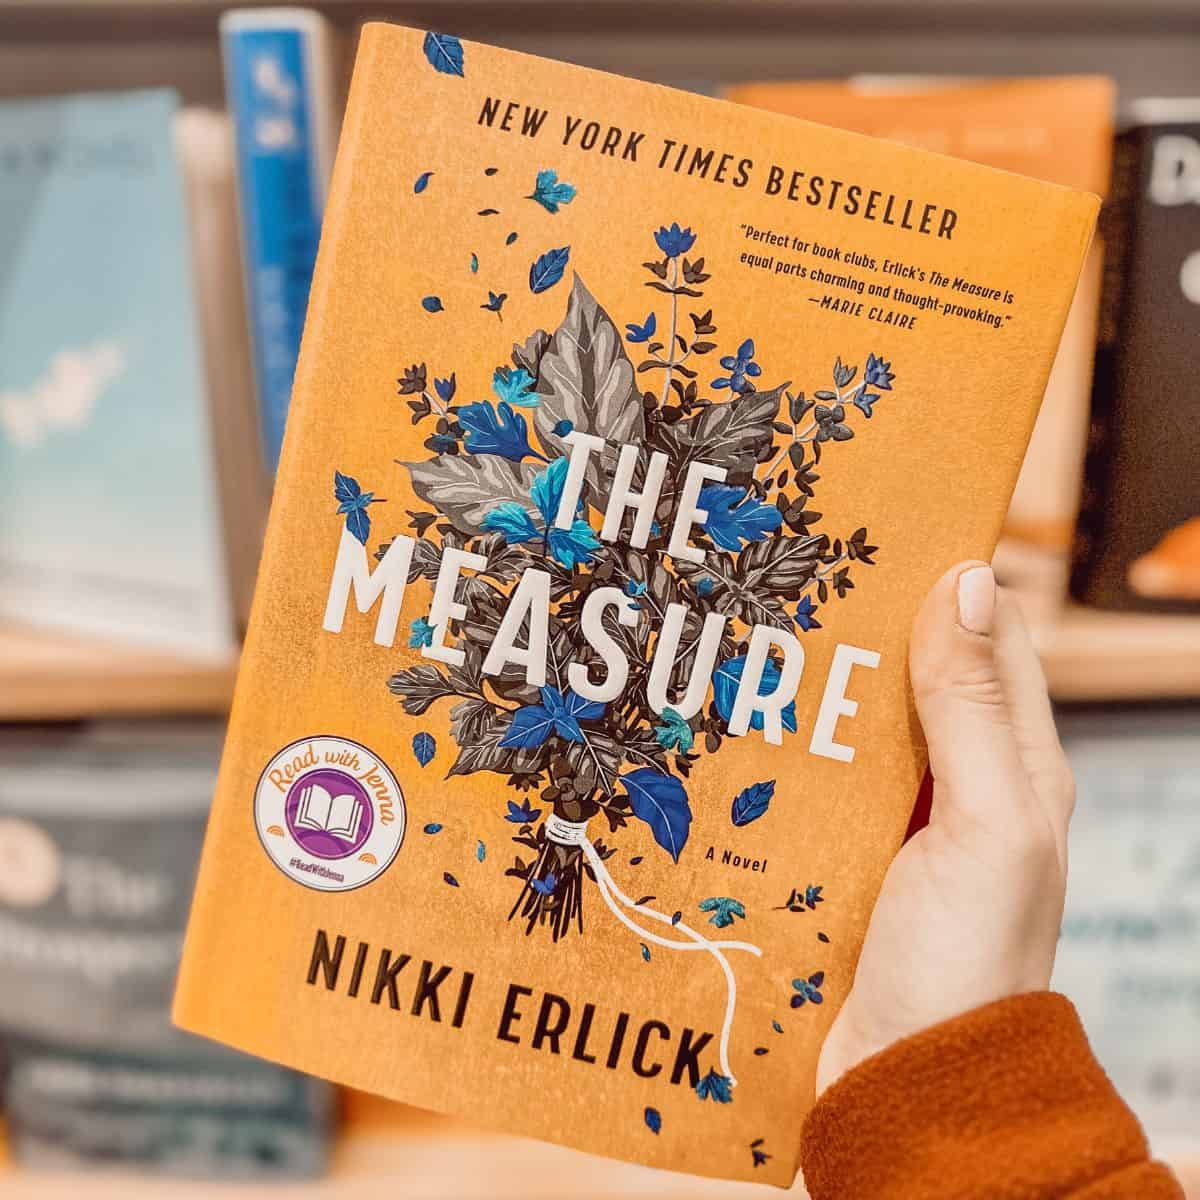 30 The Measure Book Club Questions (+ Printable PDF)